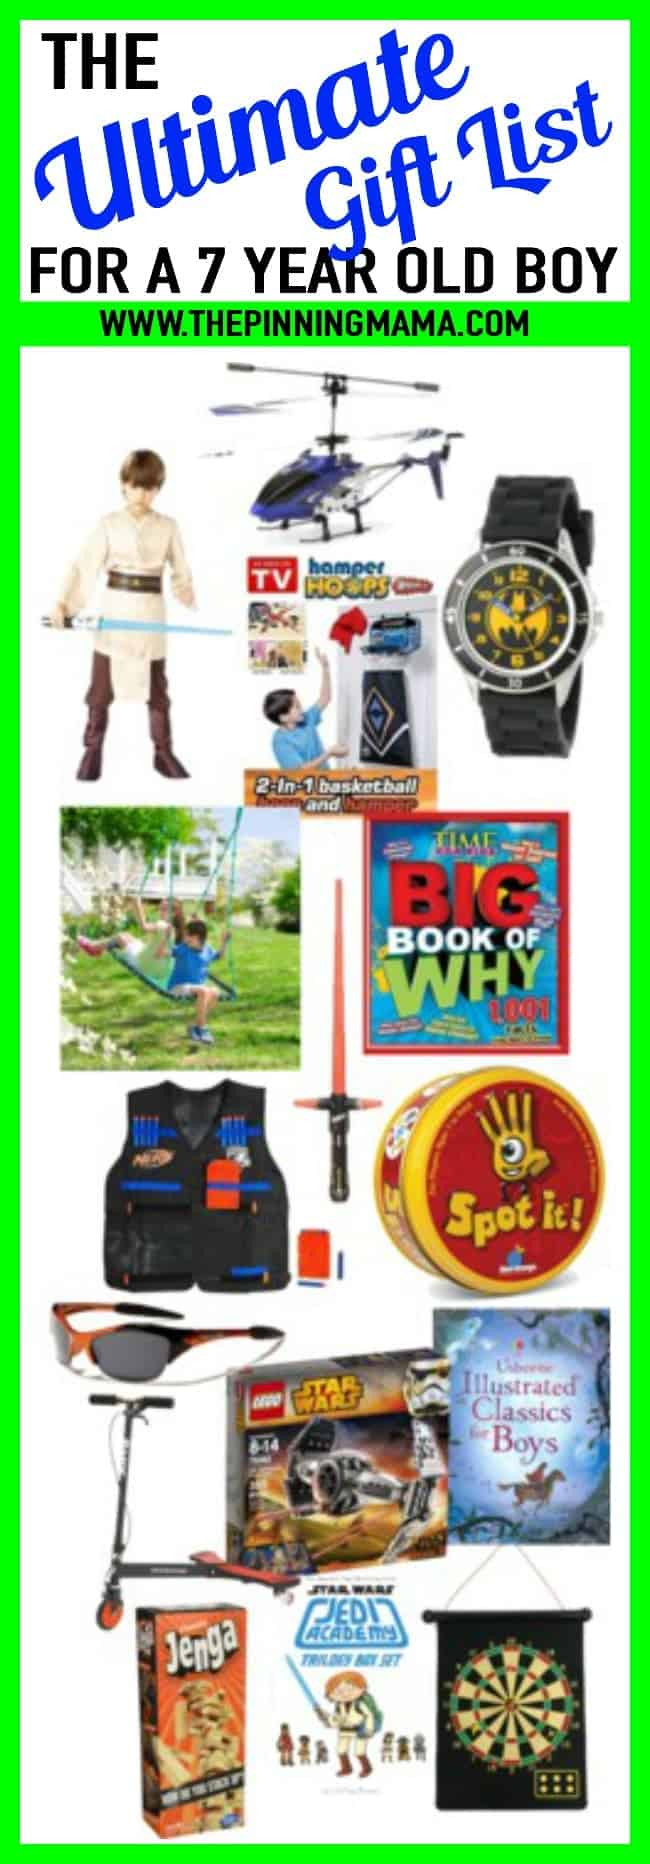 Birthday Gift For 7 Year Old Boy
 BEST Gift Ideas for a 7 Year Old Boy • The Pinning Mama